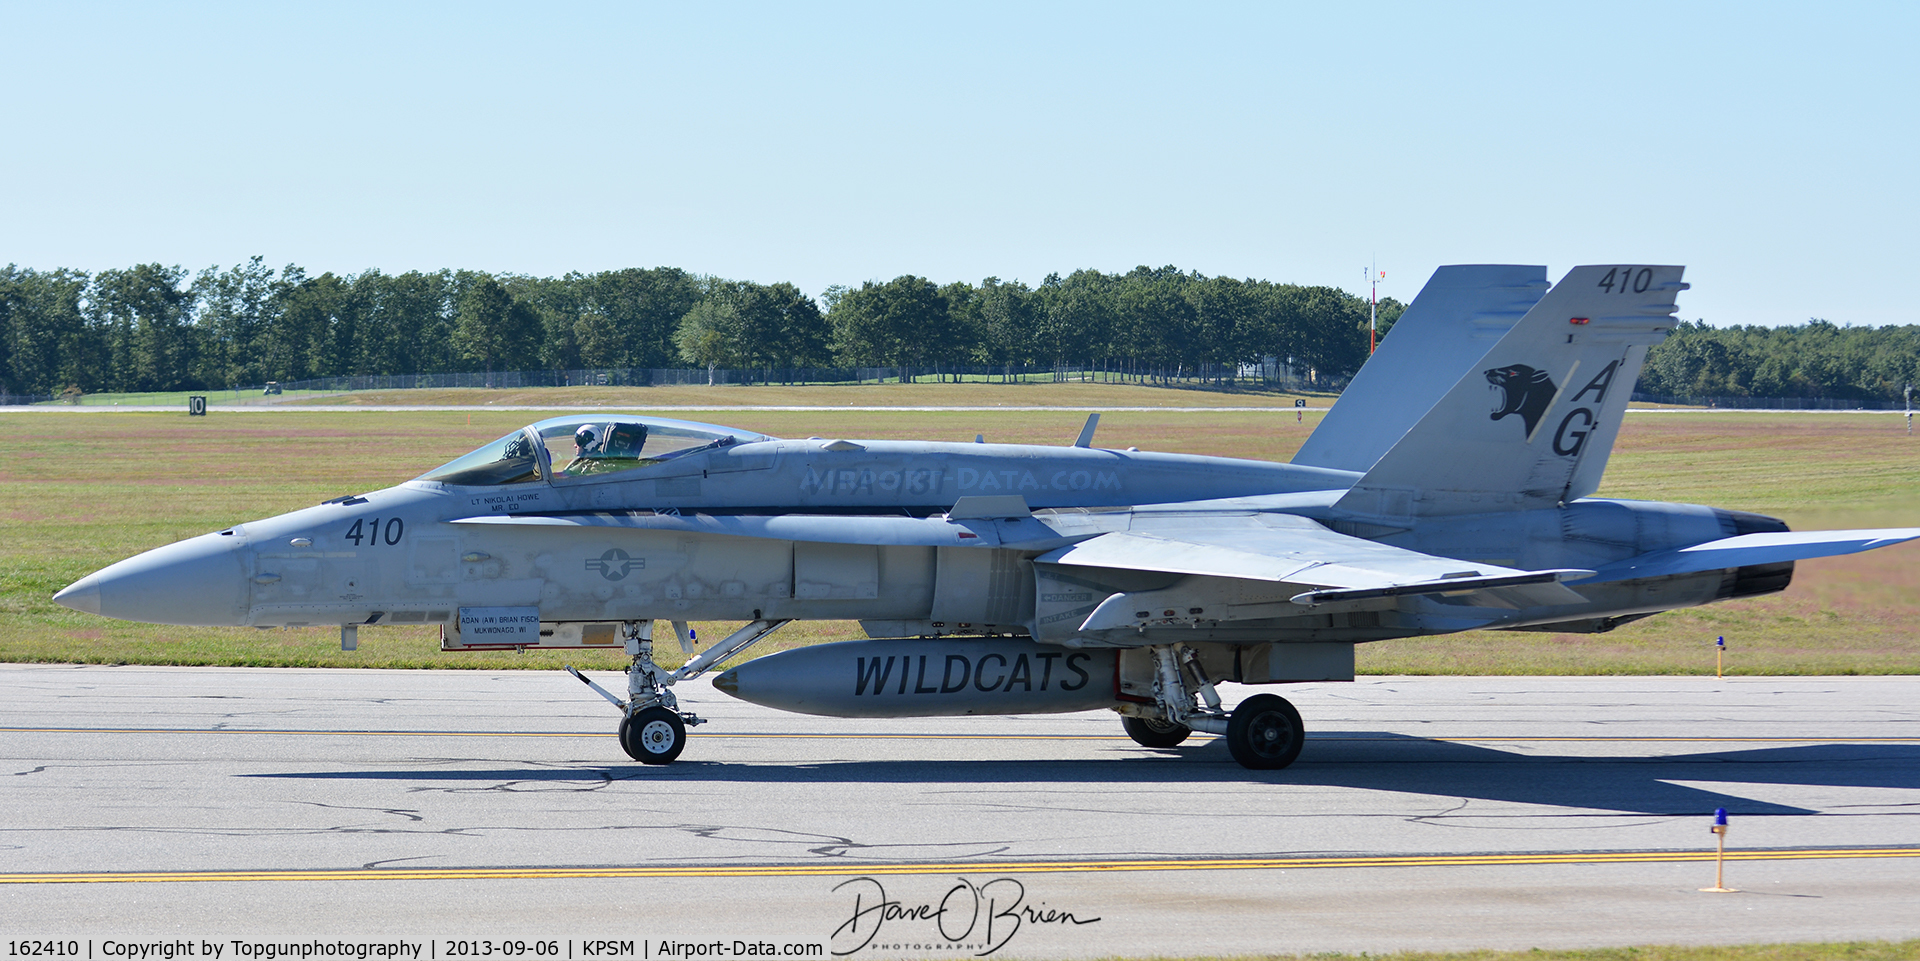 162410, McDonnell Douglas F/A-18A Hornet C/N 0242/A192, Pilot of WILDCAT11 or the ramp guy didn't fasten the panel closed on the side and his bag fell out on take off. Had to declare and IFE because something went through his left engine.